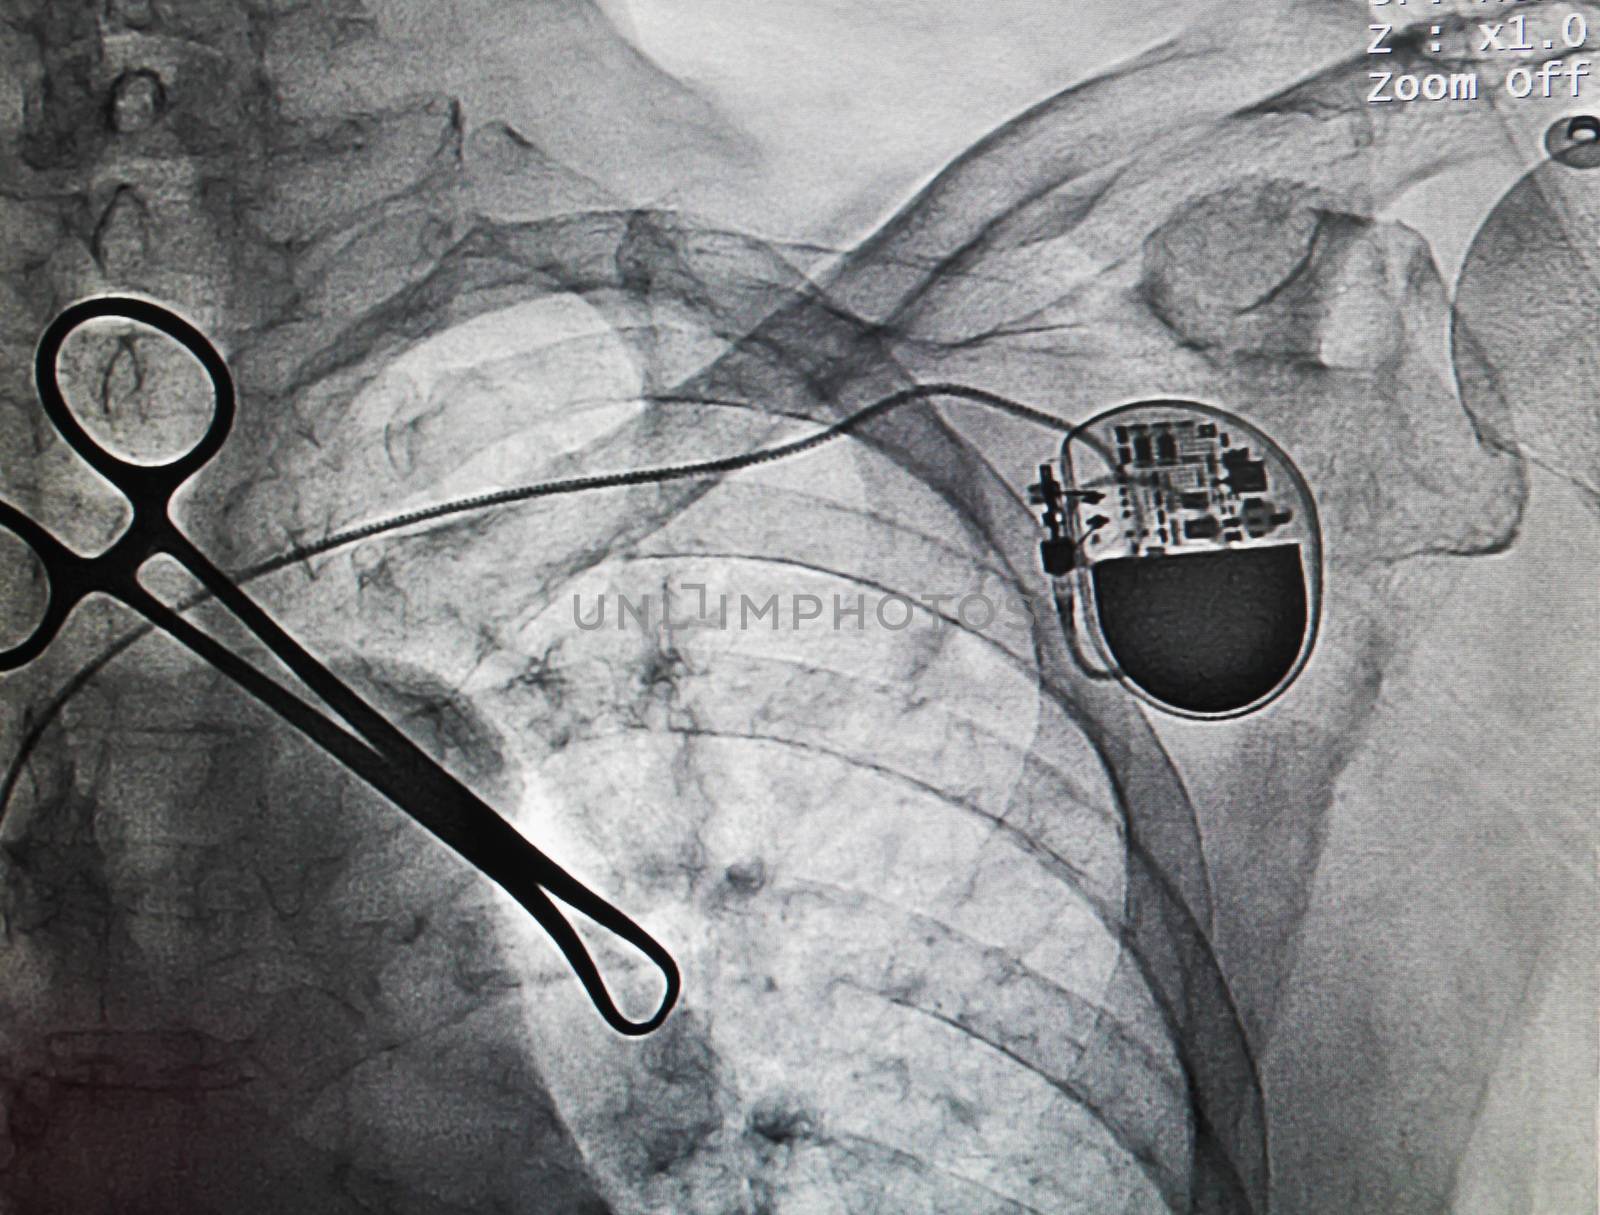 VVIR pacemaker in x-ray image in cardiac catheterization laboratory